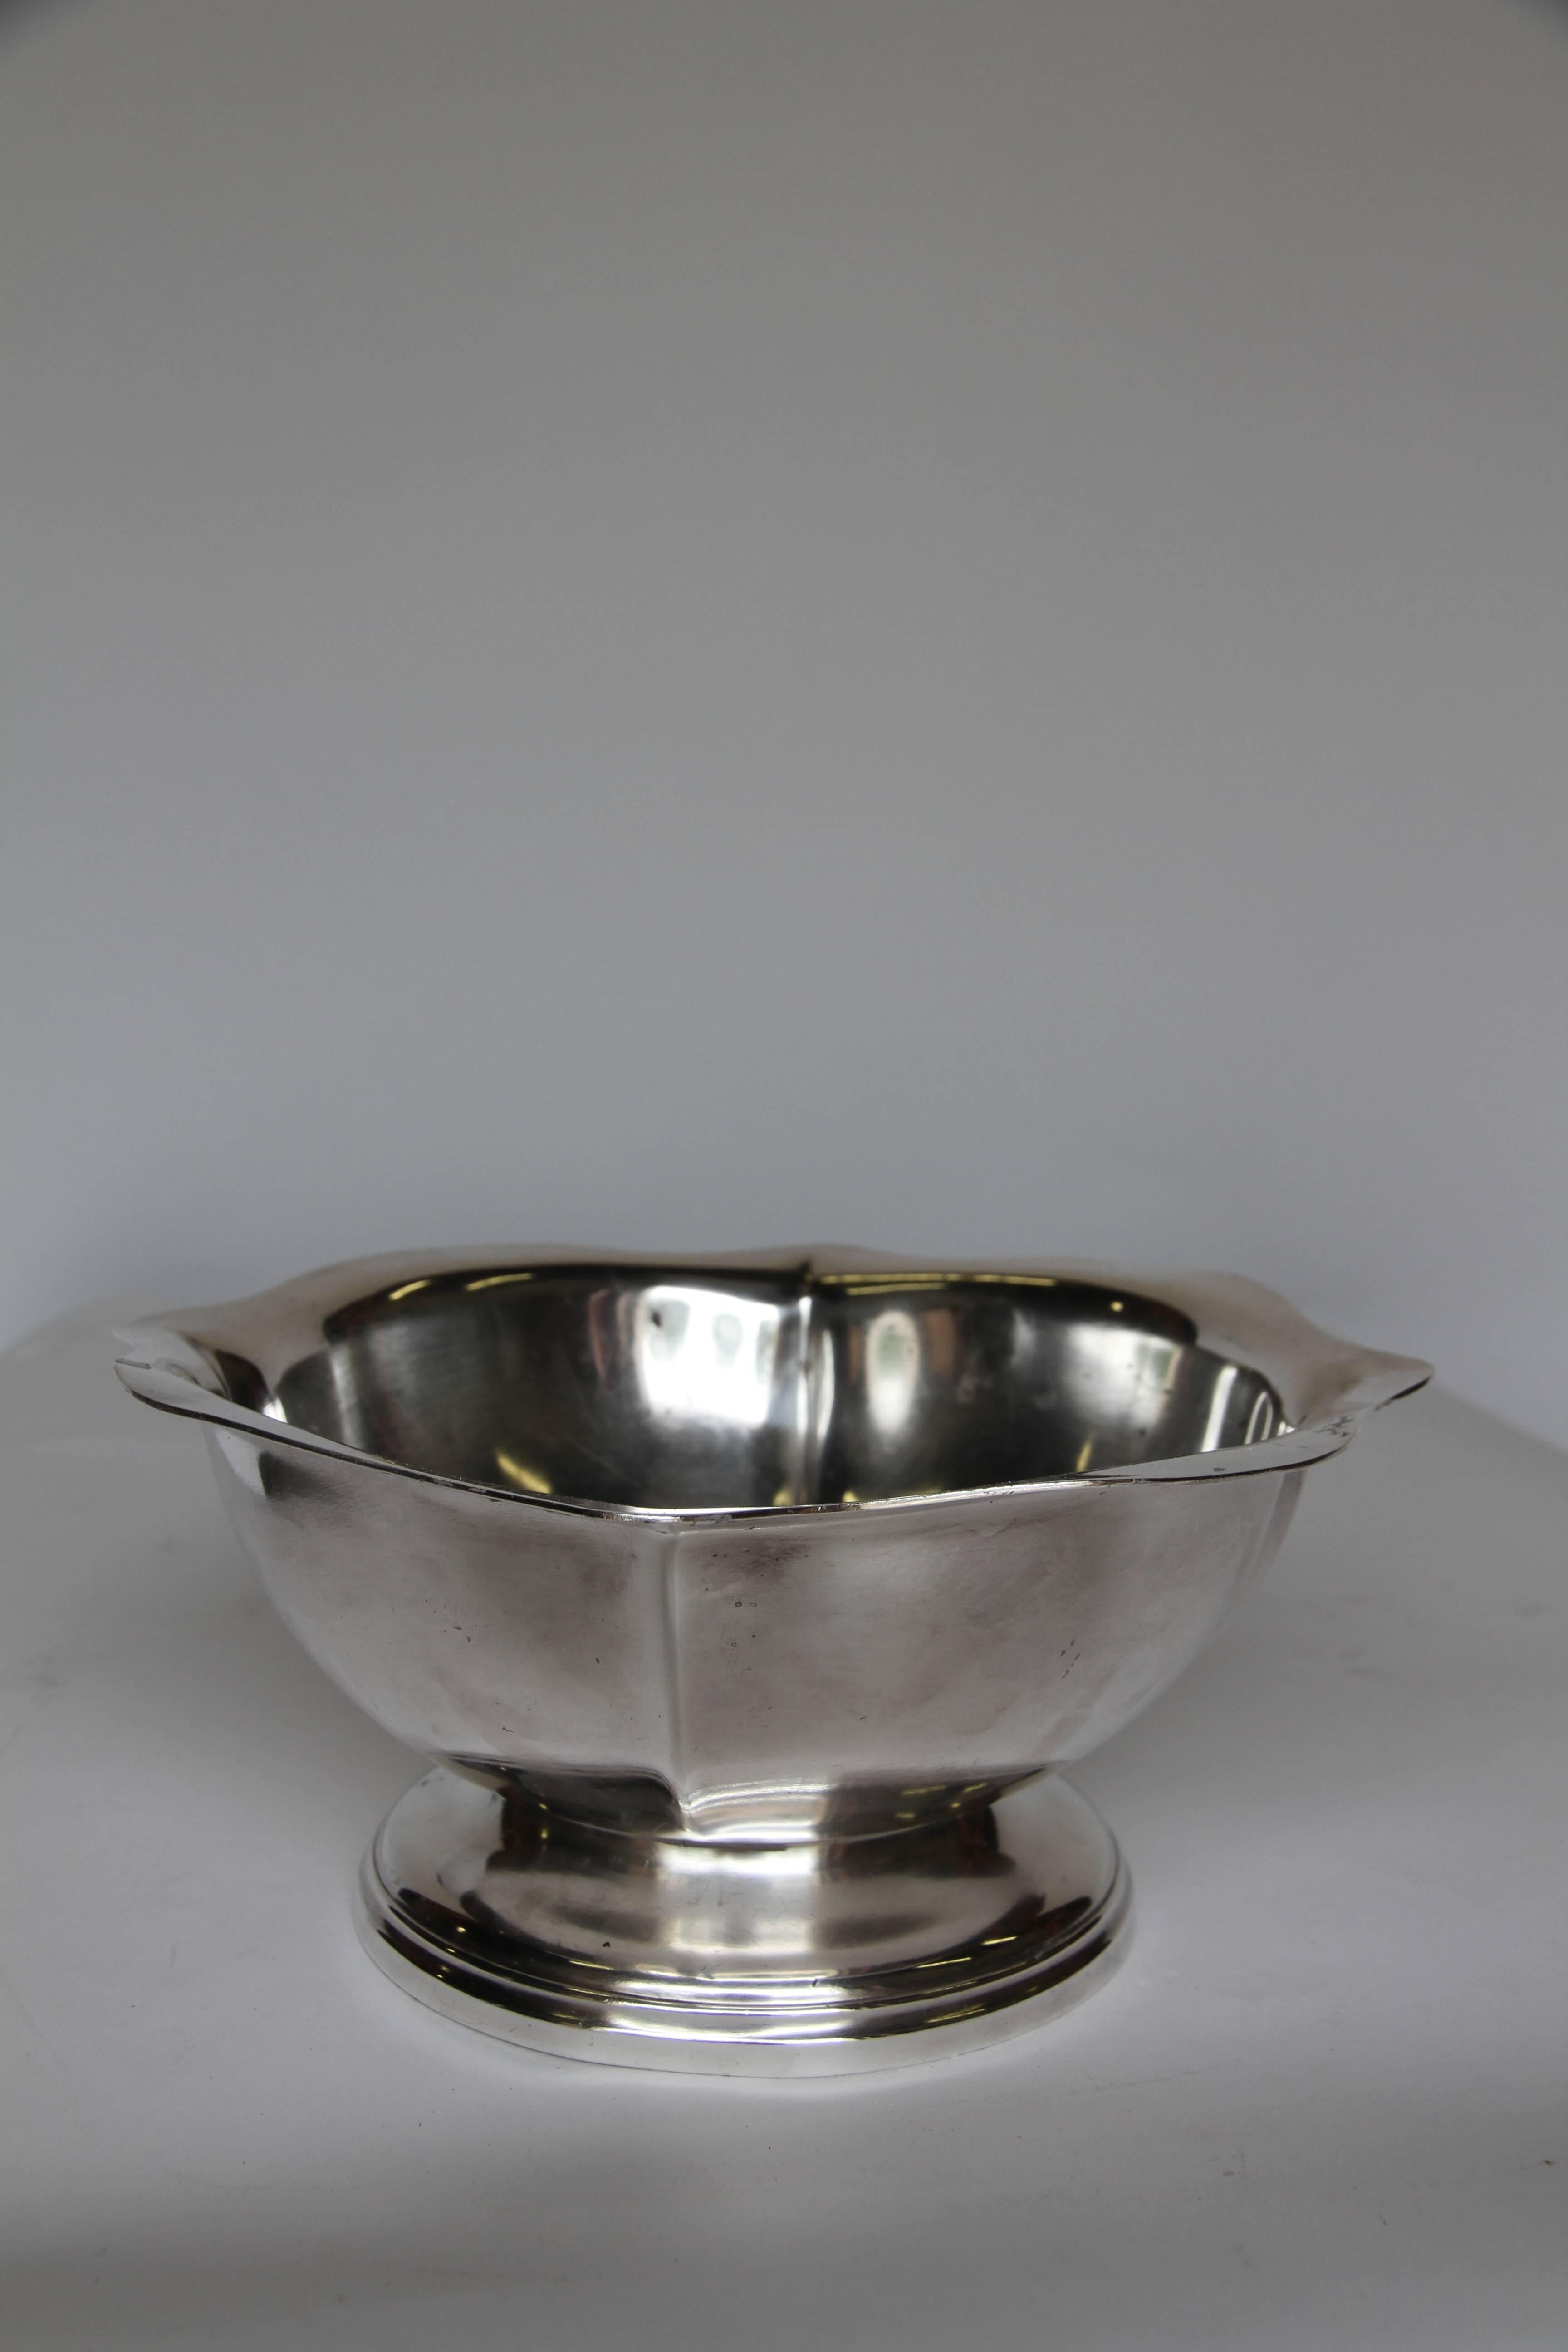 A World War II era silver soldered serving bowl made by Reed and Barton for the US Navy. These pieces were made extra dense and heavy so as not to spill when the ship was under sail. Marked Reed & Barton 3610, along with a mark showing a parachute,